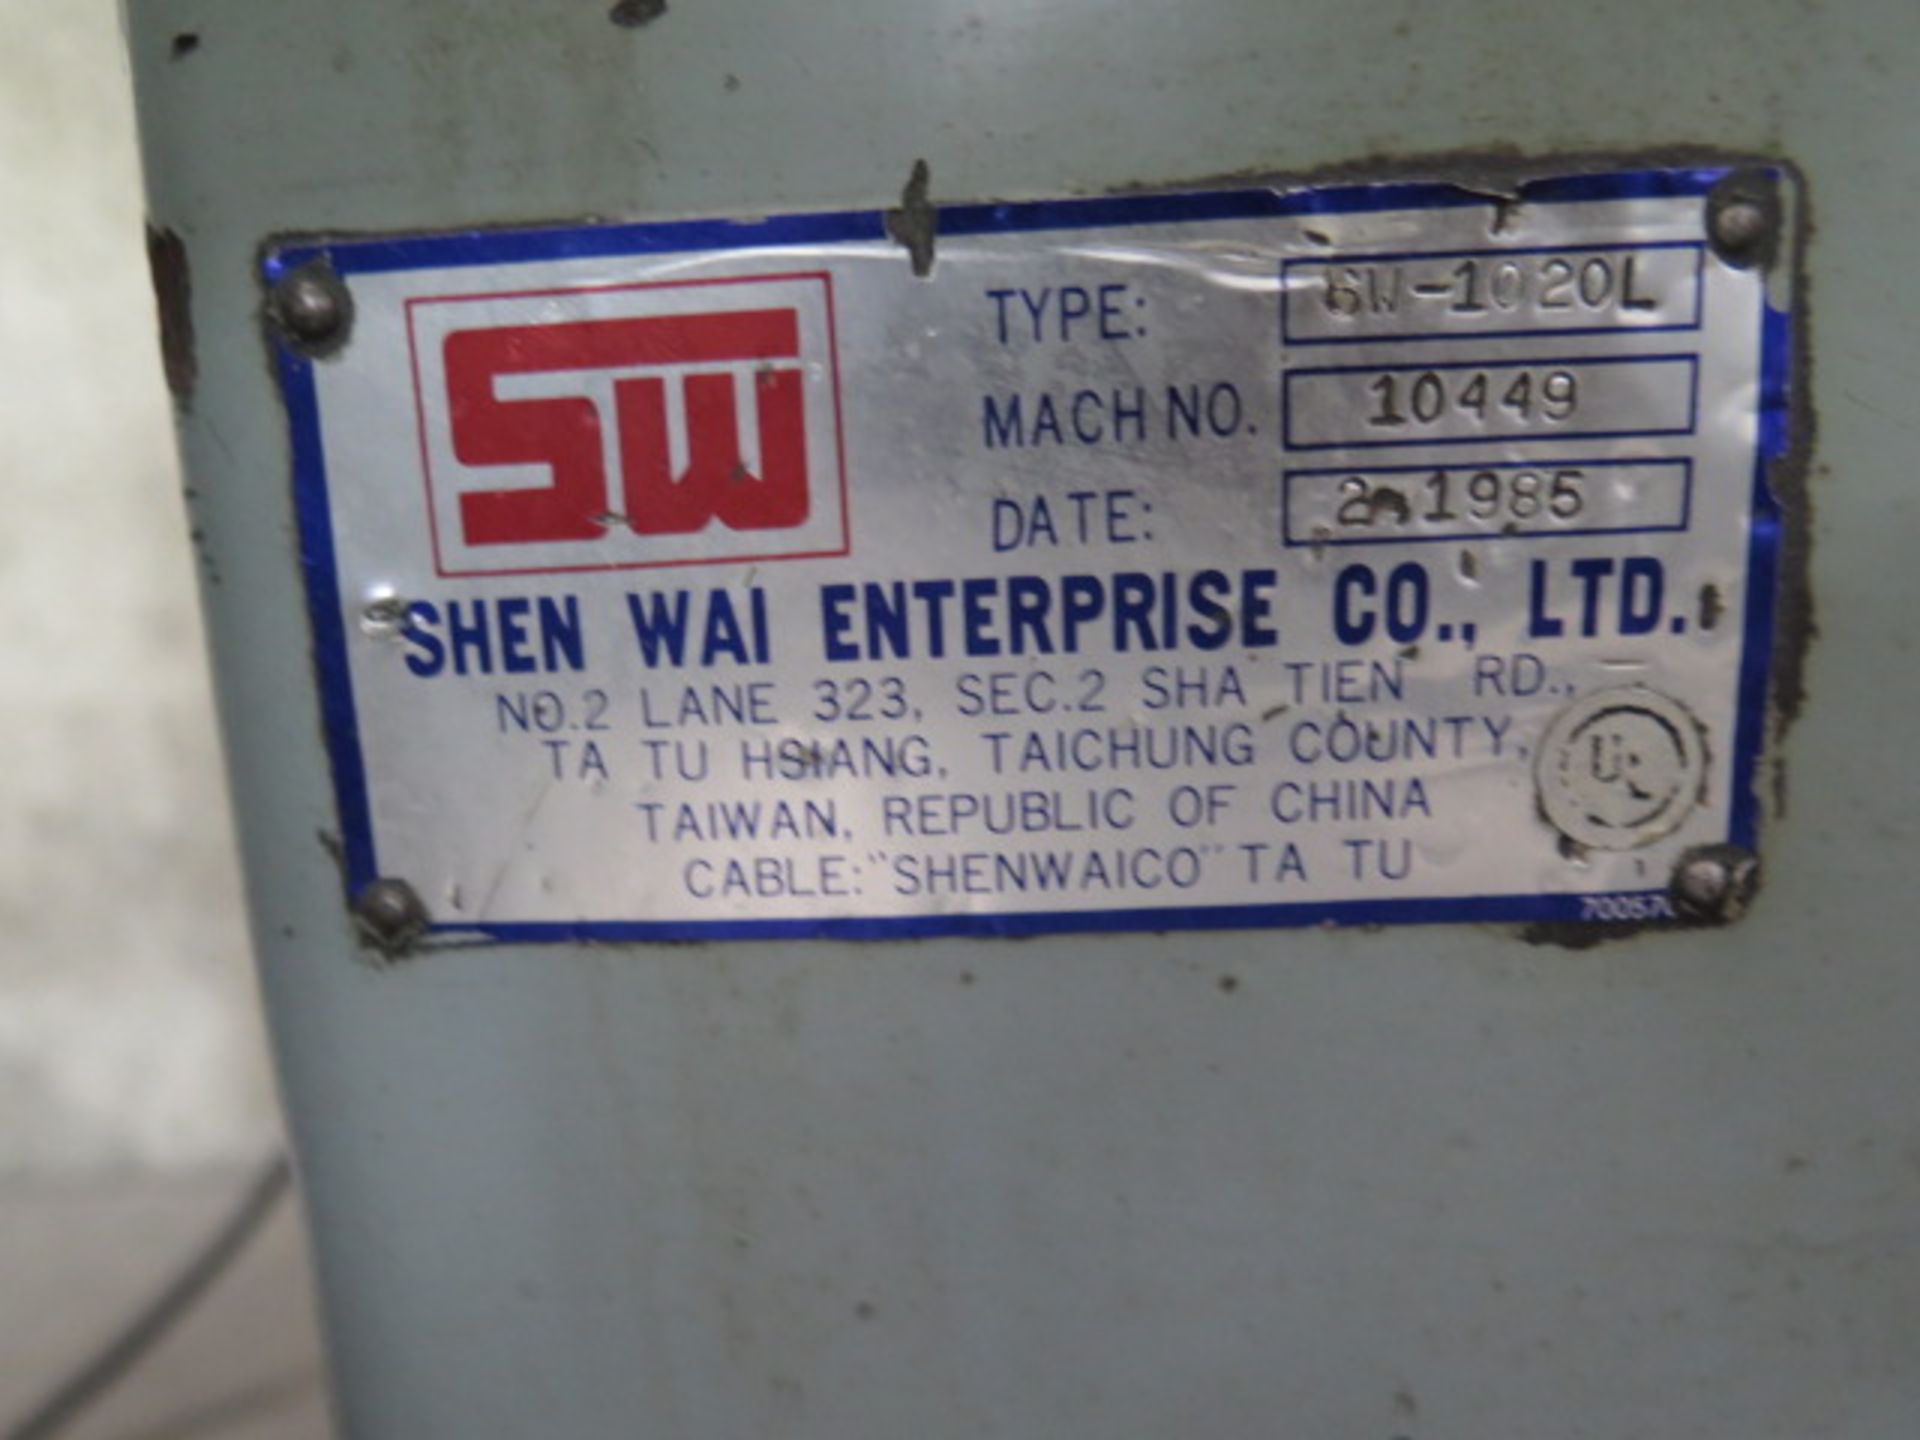 SW Shenwai “Chieftain” 15” x 40” Geared Head Gap Lathe s/n 10449 w/ 40-1800 RPM, Inch/mm, SOLD AS IS - Image 12 of 12